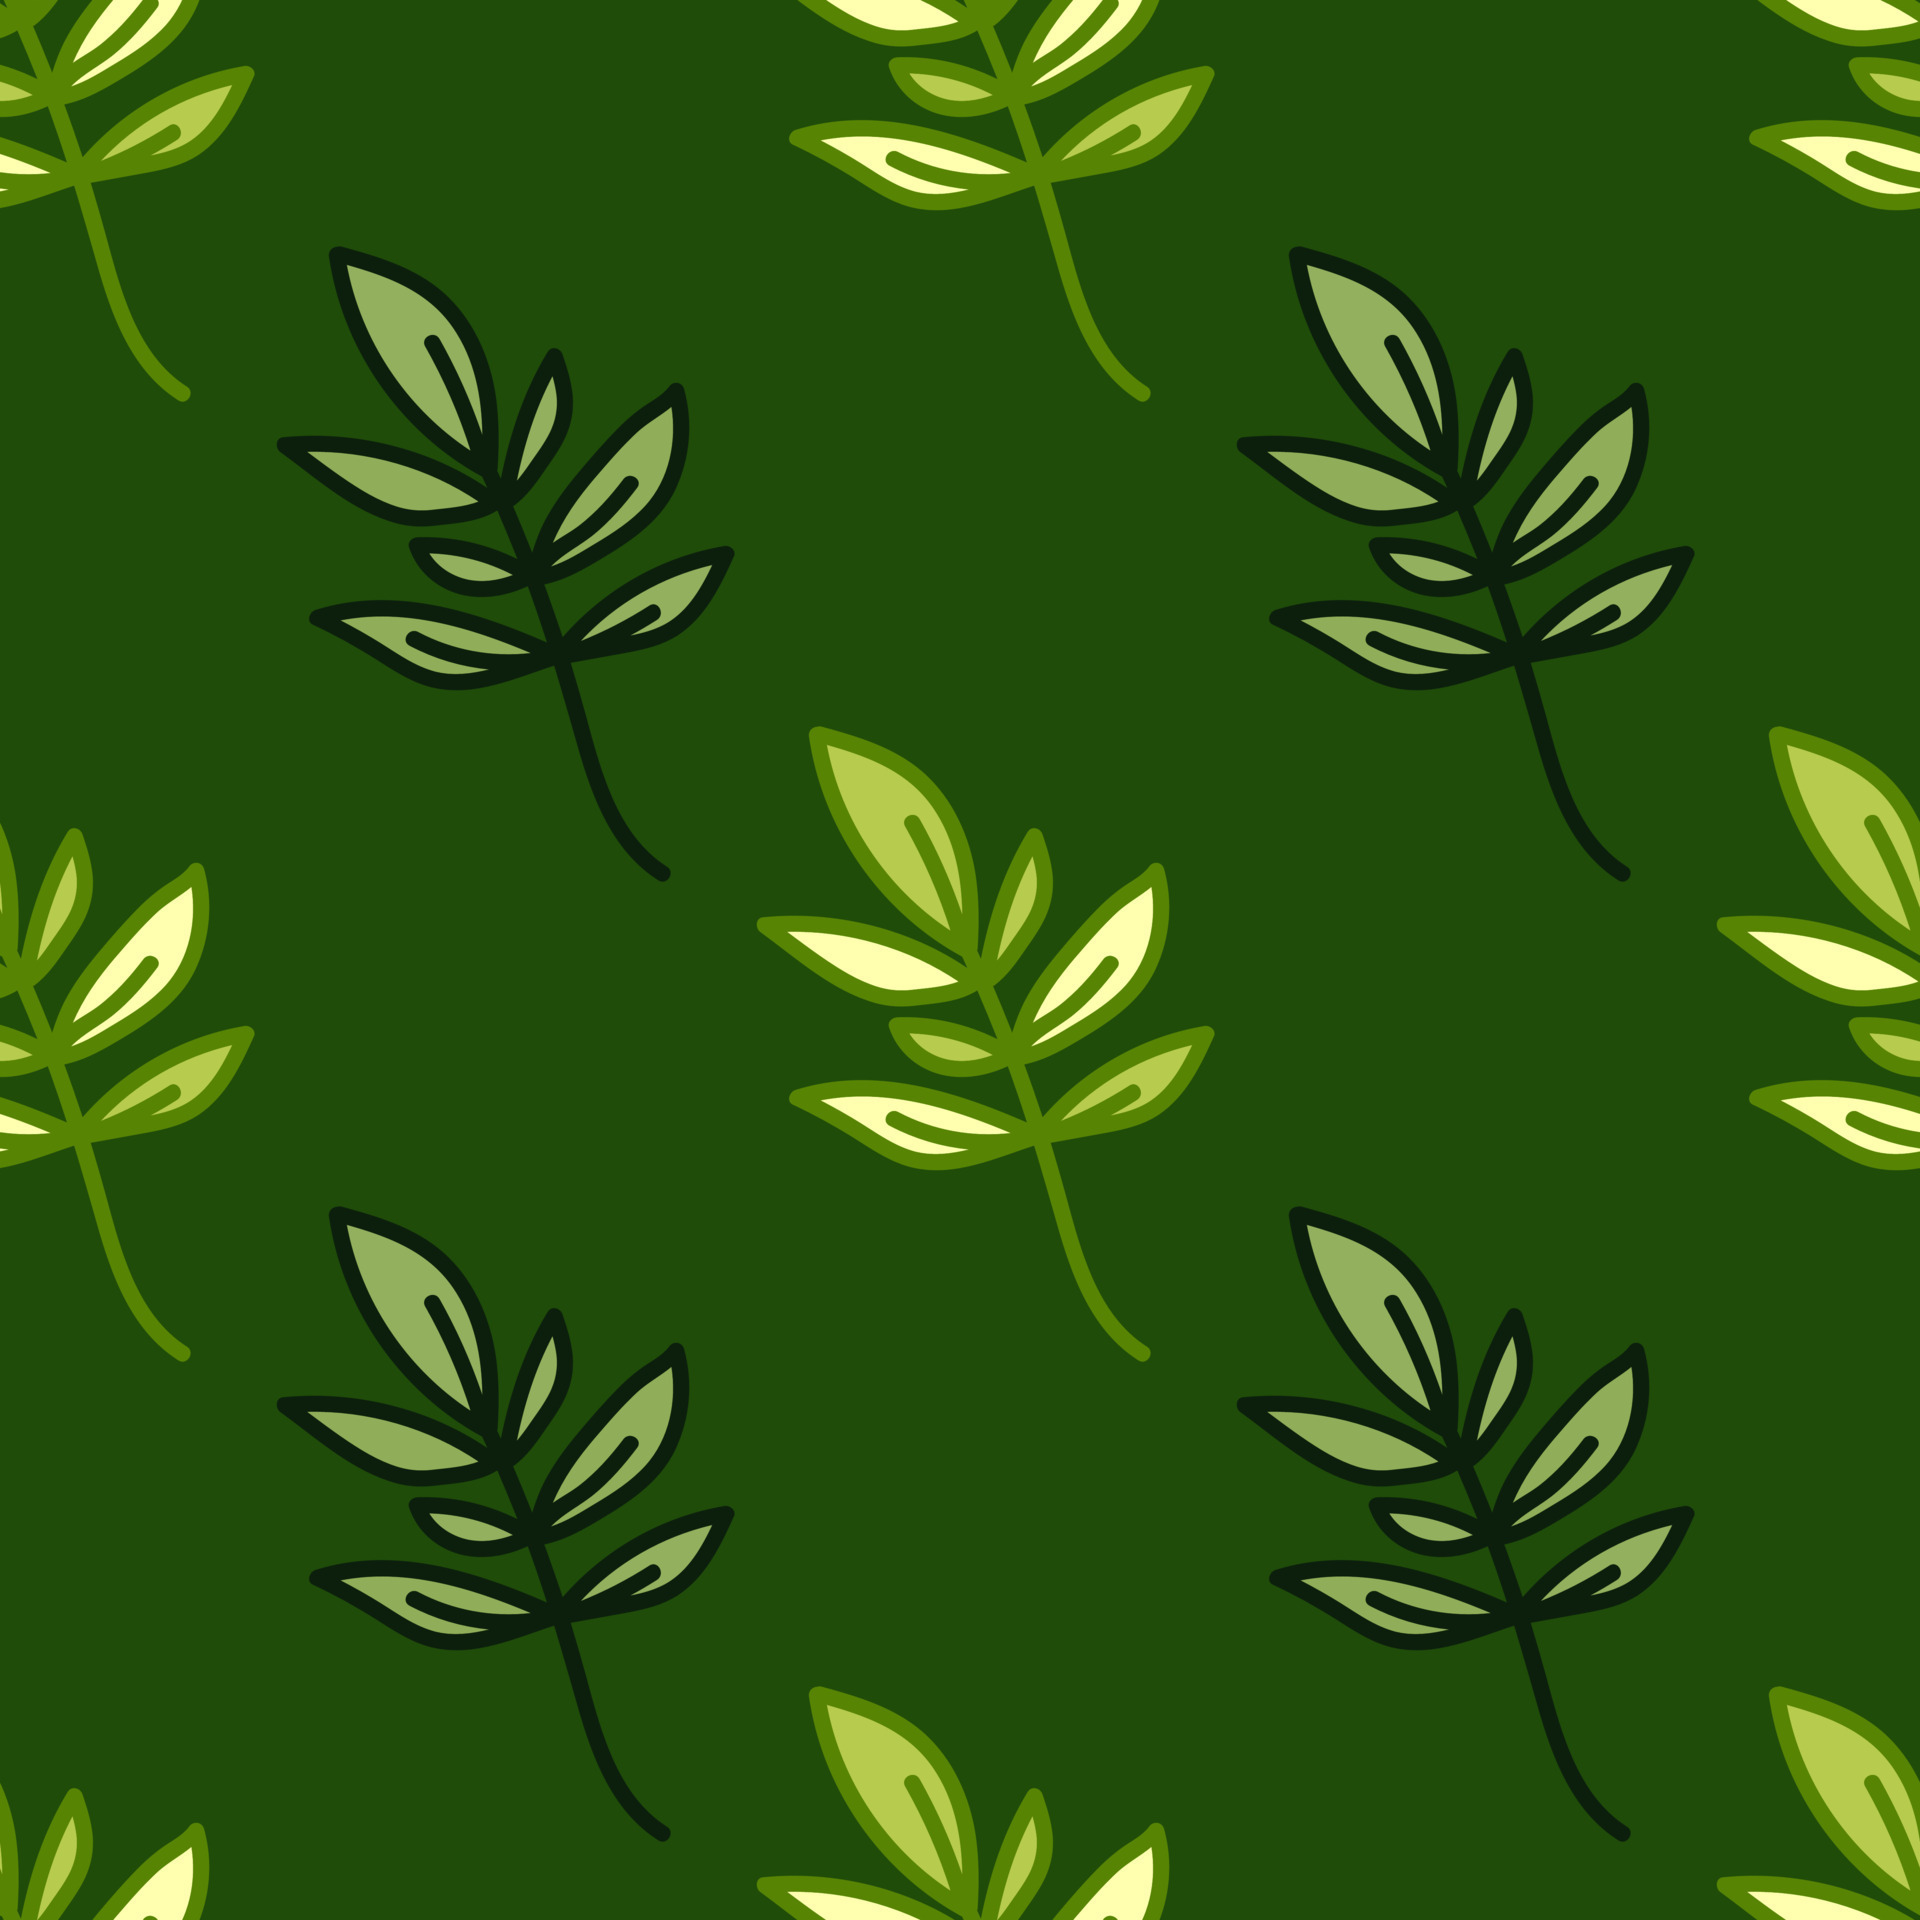 Cute Leaves Pattern Wrapping Textile Wallpaper Stock Vector Royalty Free  707197909  Shutterstock